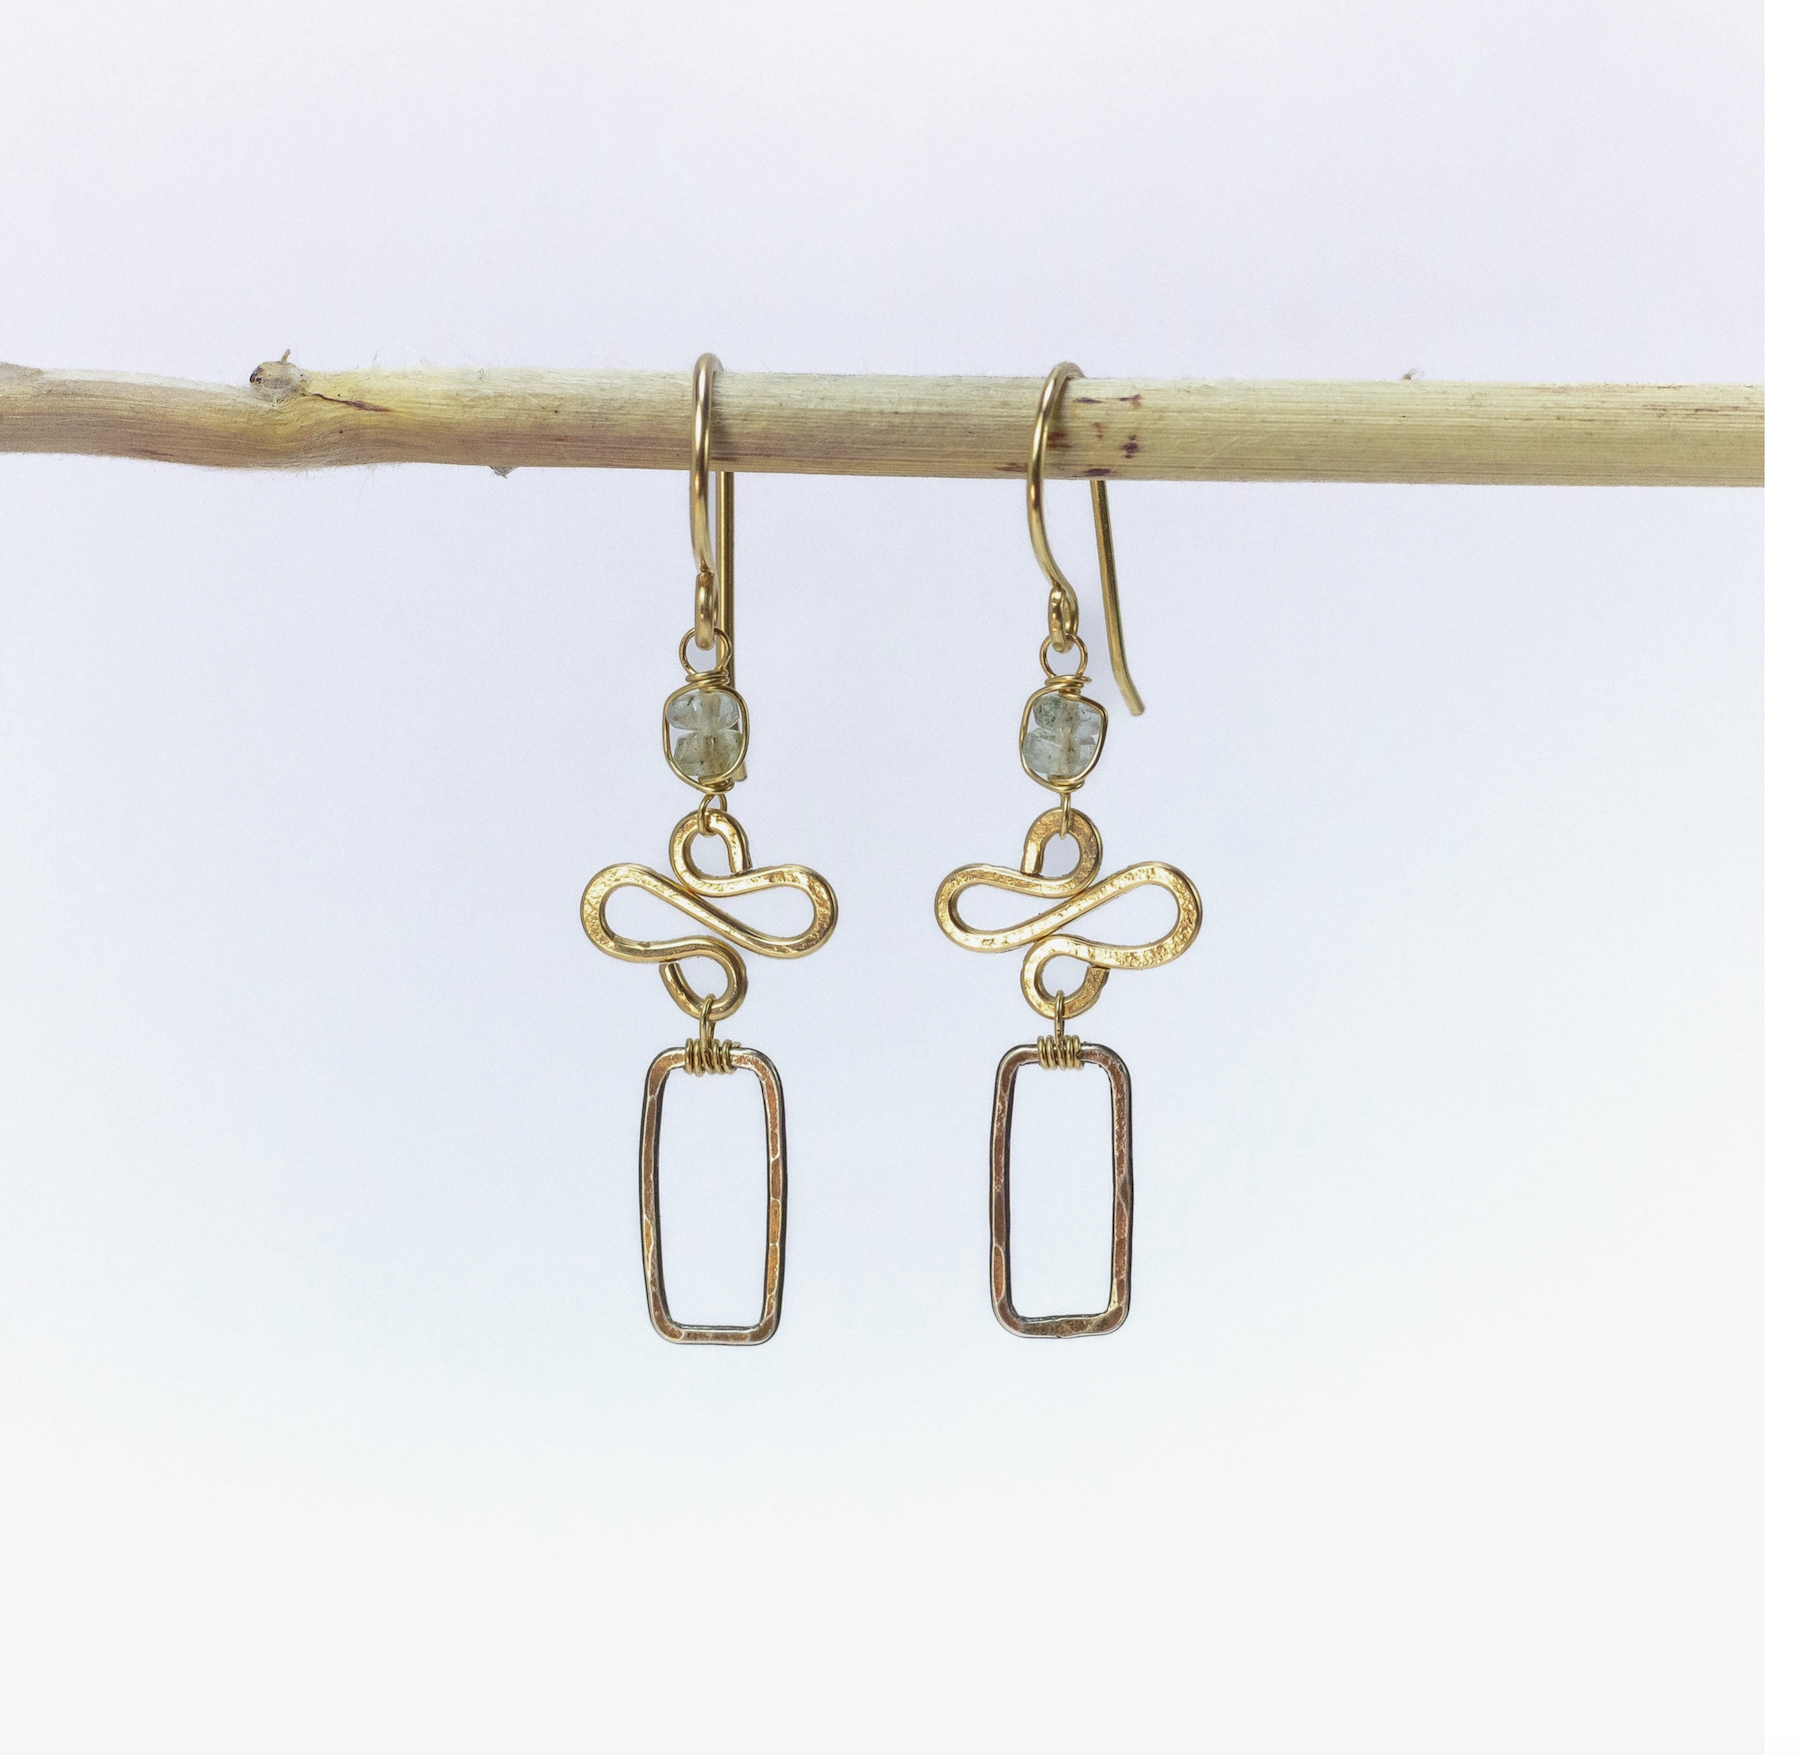 Serpent's Serenity Earrings - Heart of the Home LV